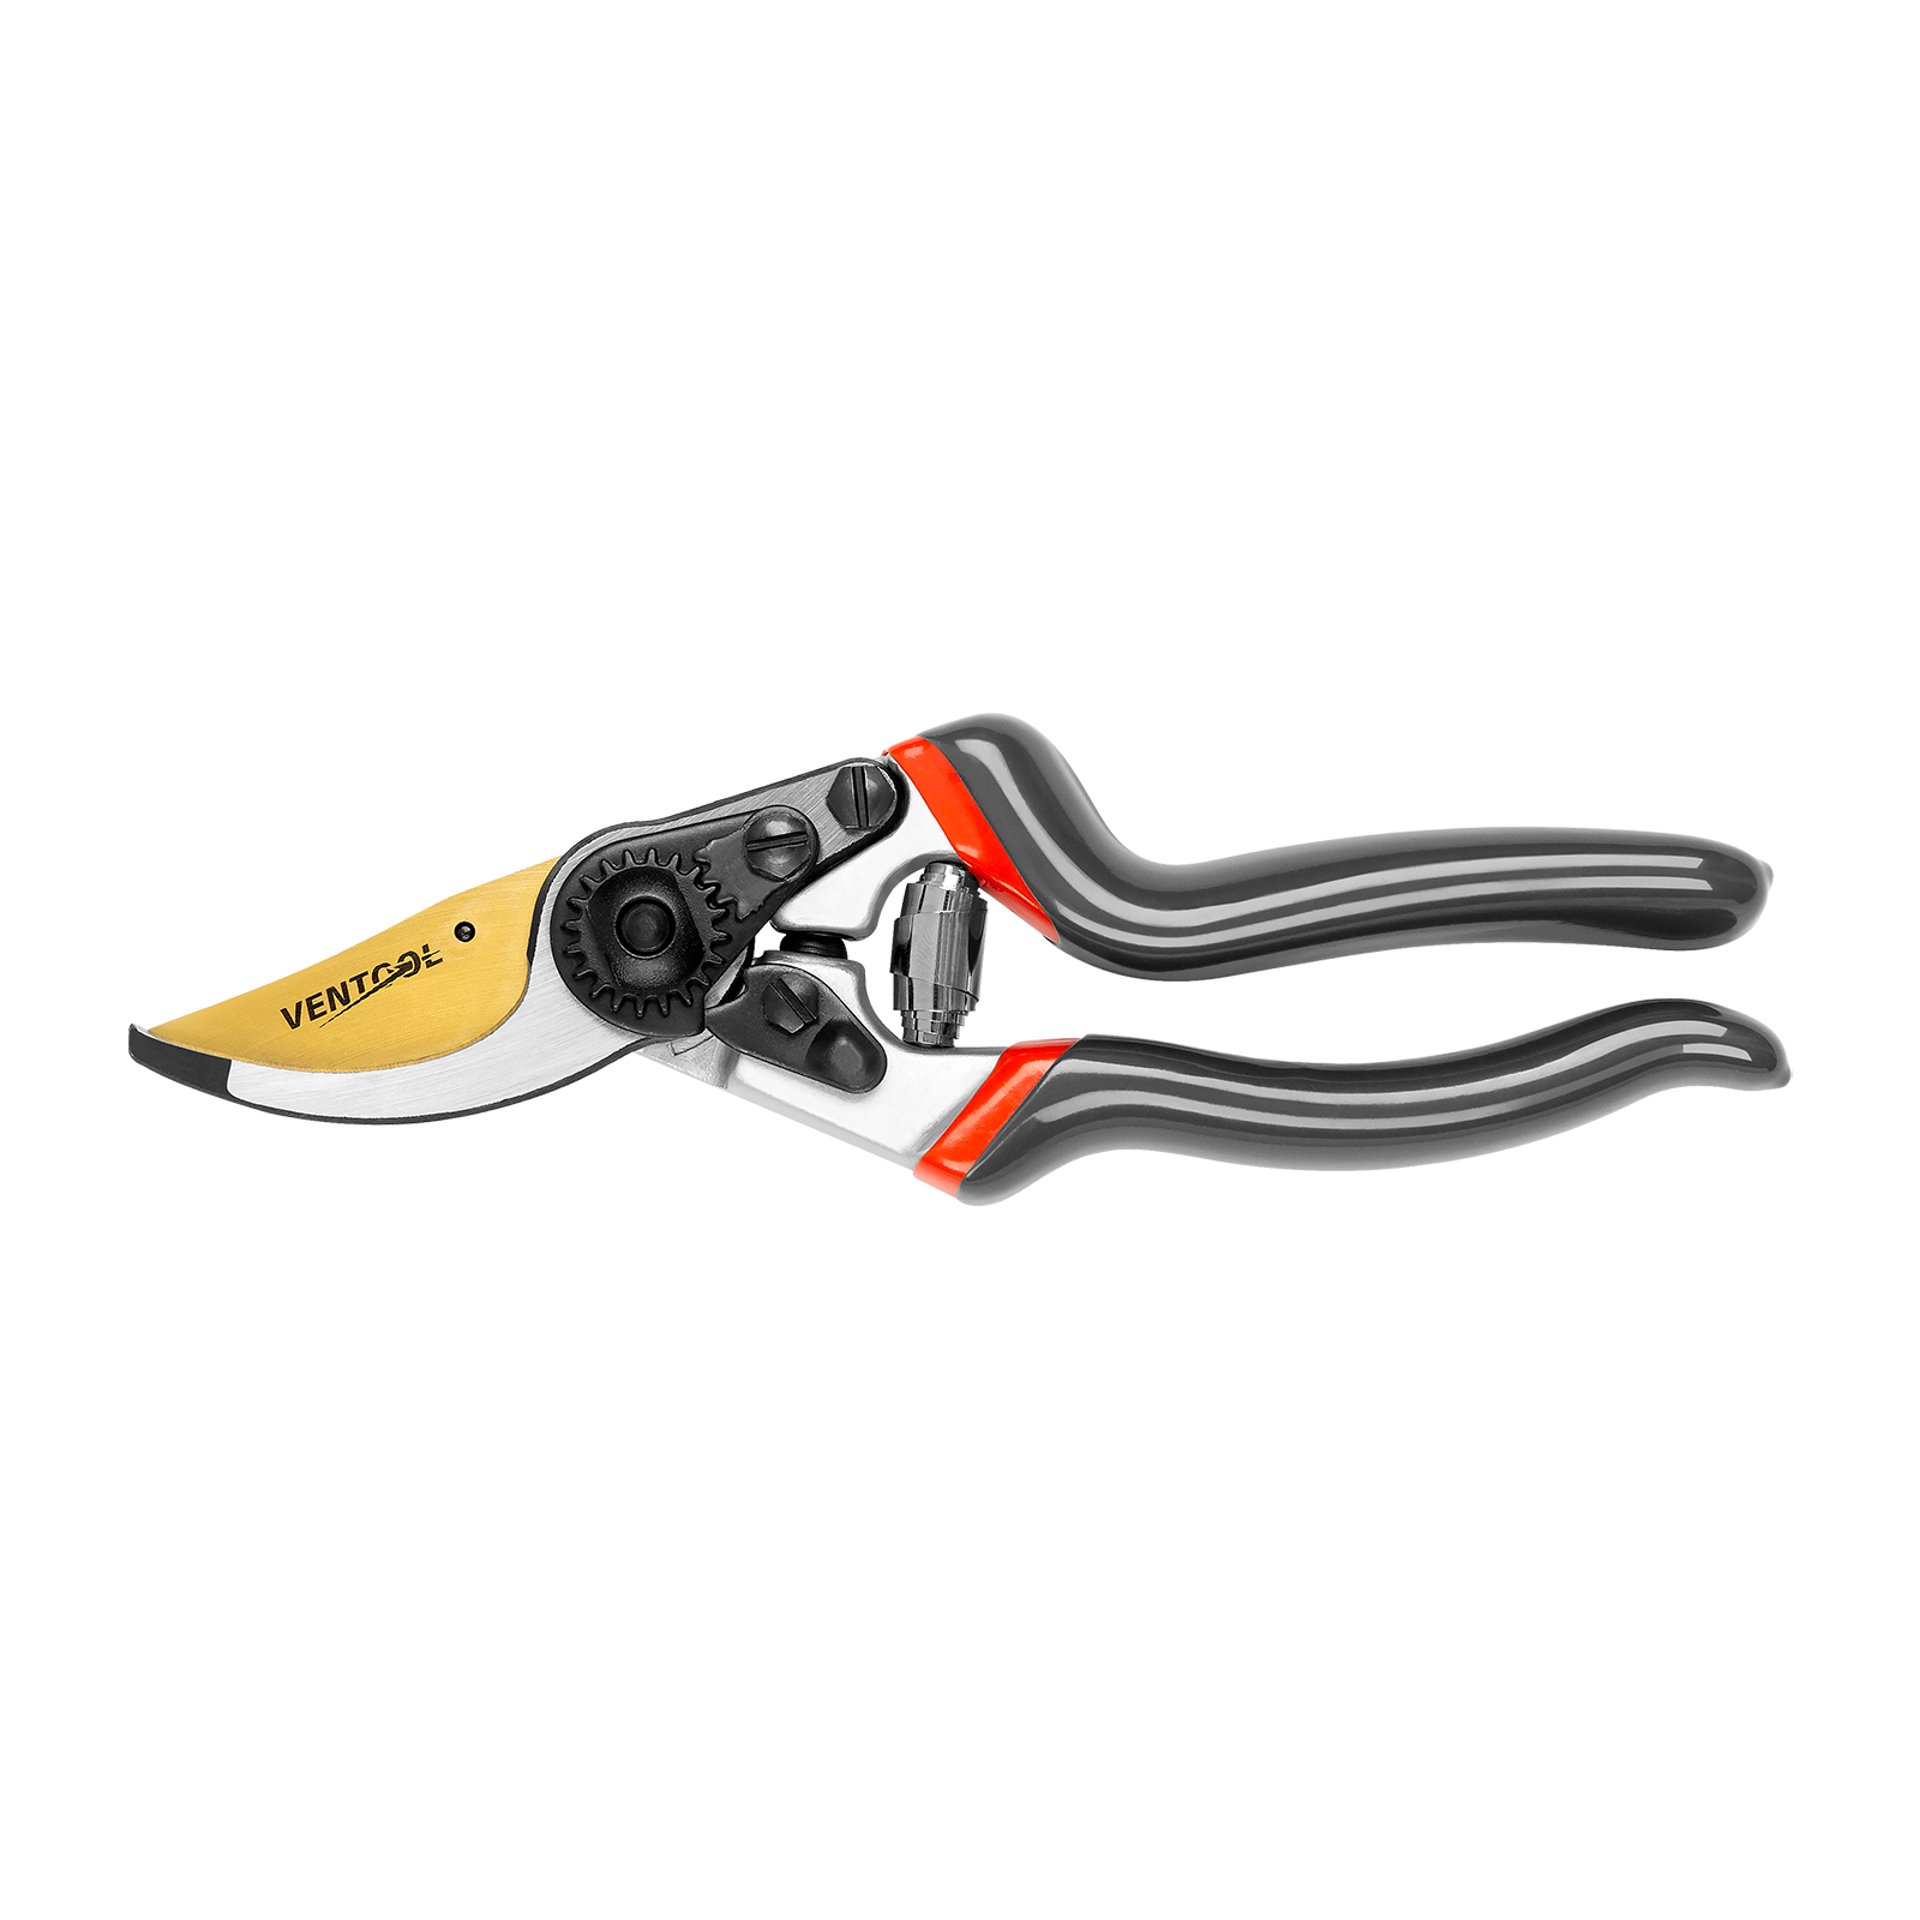 8" Sharp Bypass Pruning Shears with Ergonomic Arch Handles